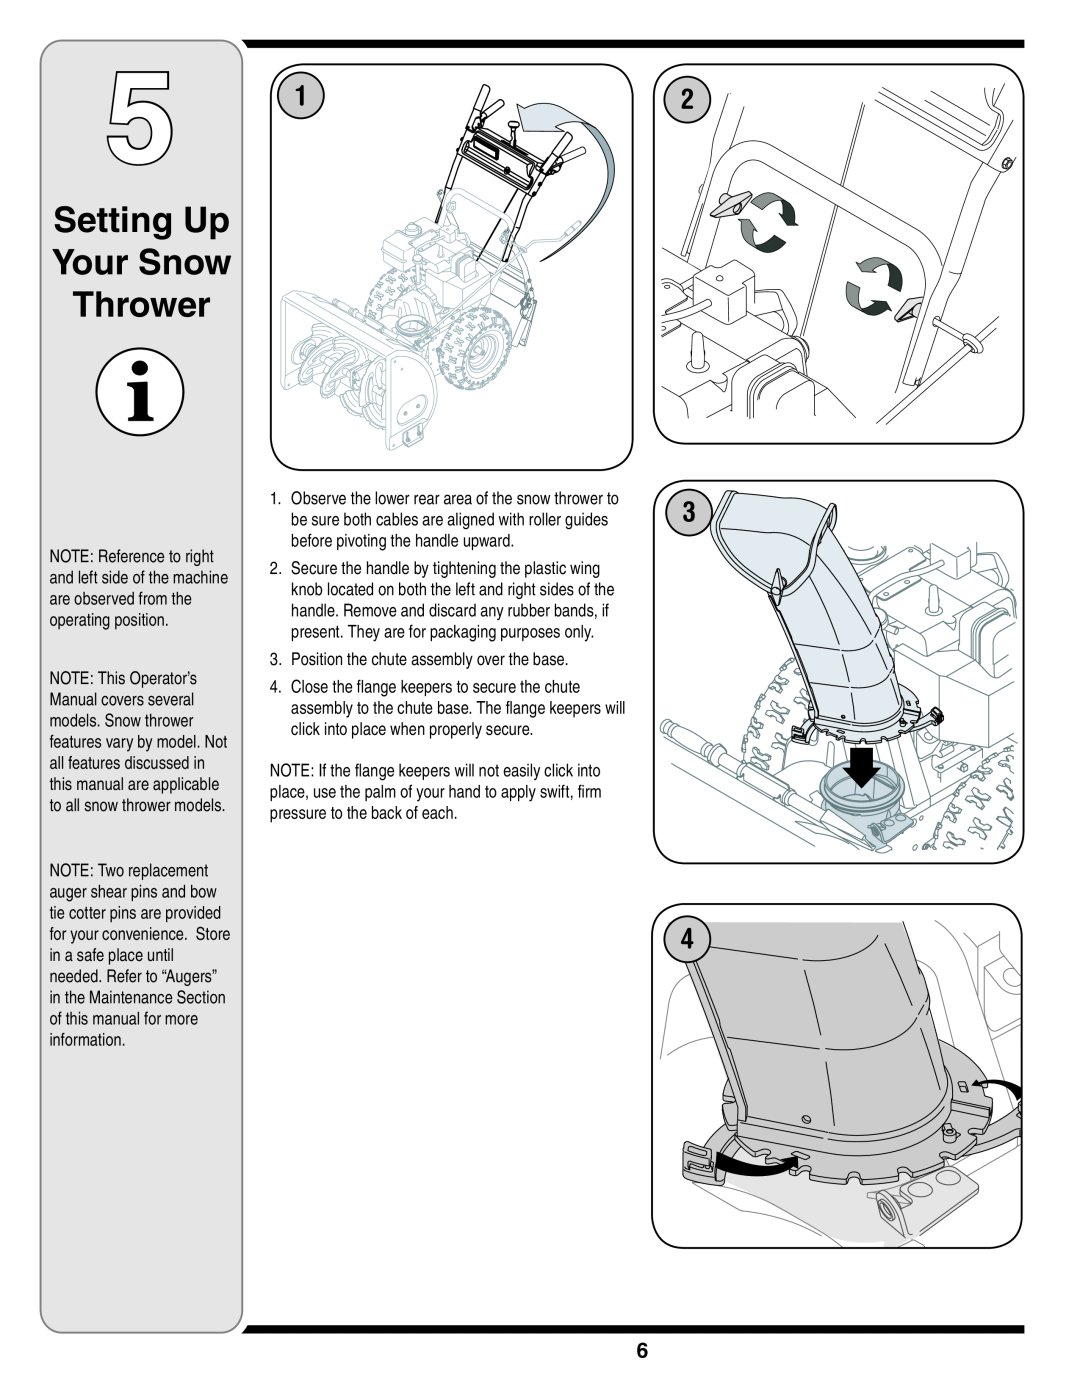 MTD 769-01275C warranty Setting Up Your Snow Thrower, Position the chute assembly over the base 